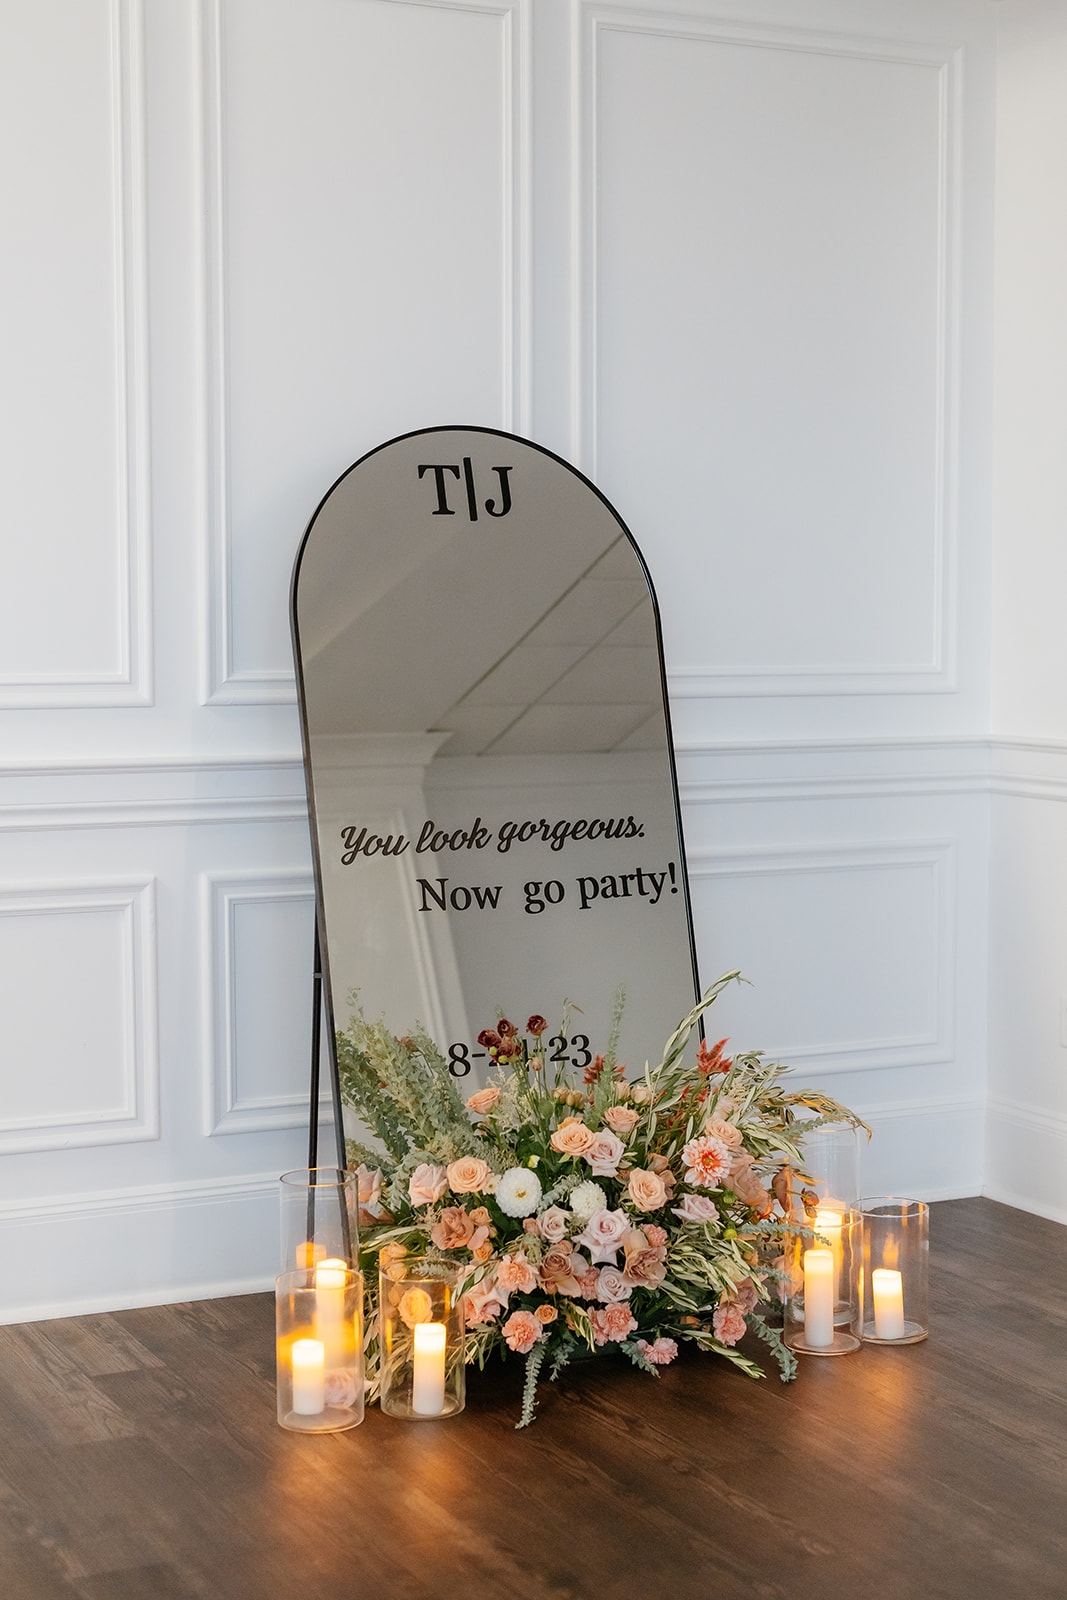 Flowers and candles reflecting in a mirror, creating a serene and romantic ambiance.